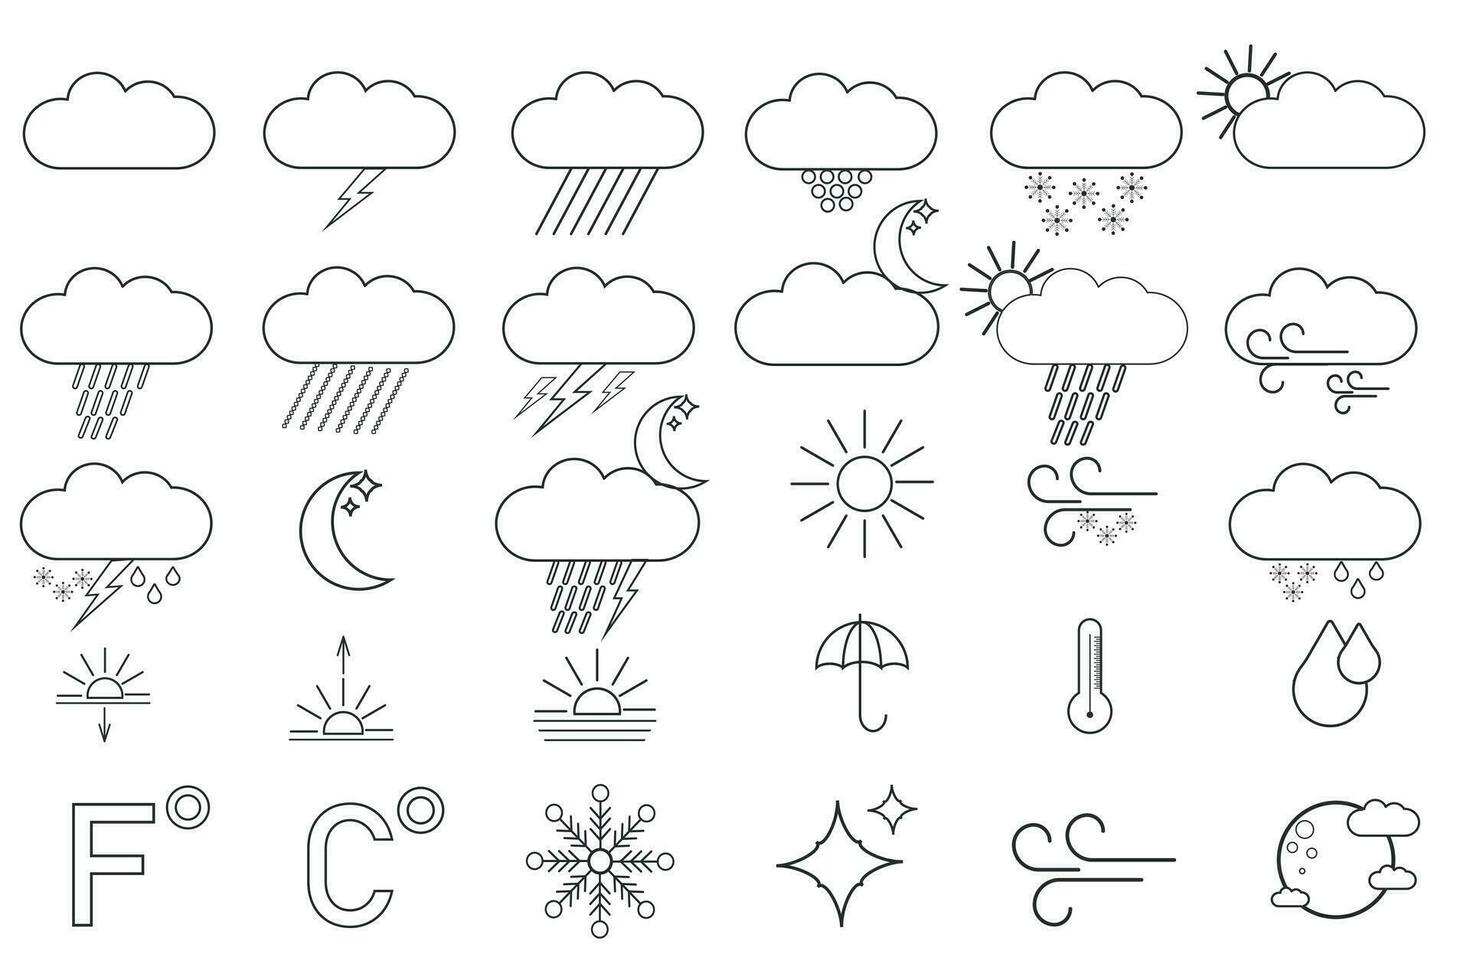 Collection of meteorological icons or symbols for weather forecast - sun, clouds, wind, rain, snow, air temperature drawn with contour lines on white background. vector